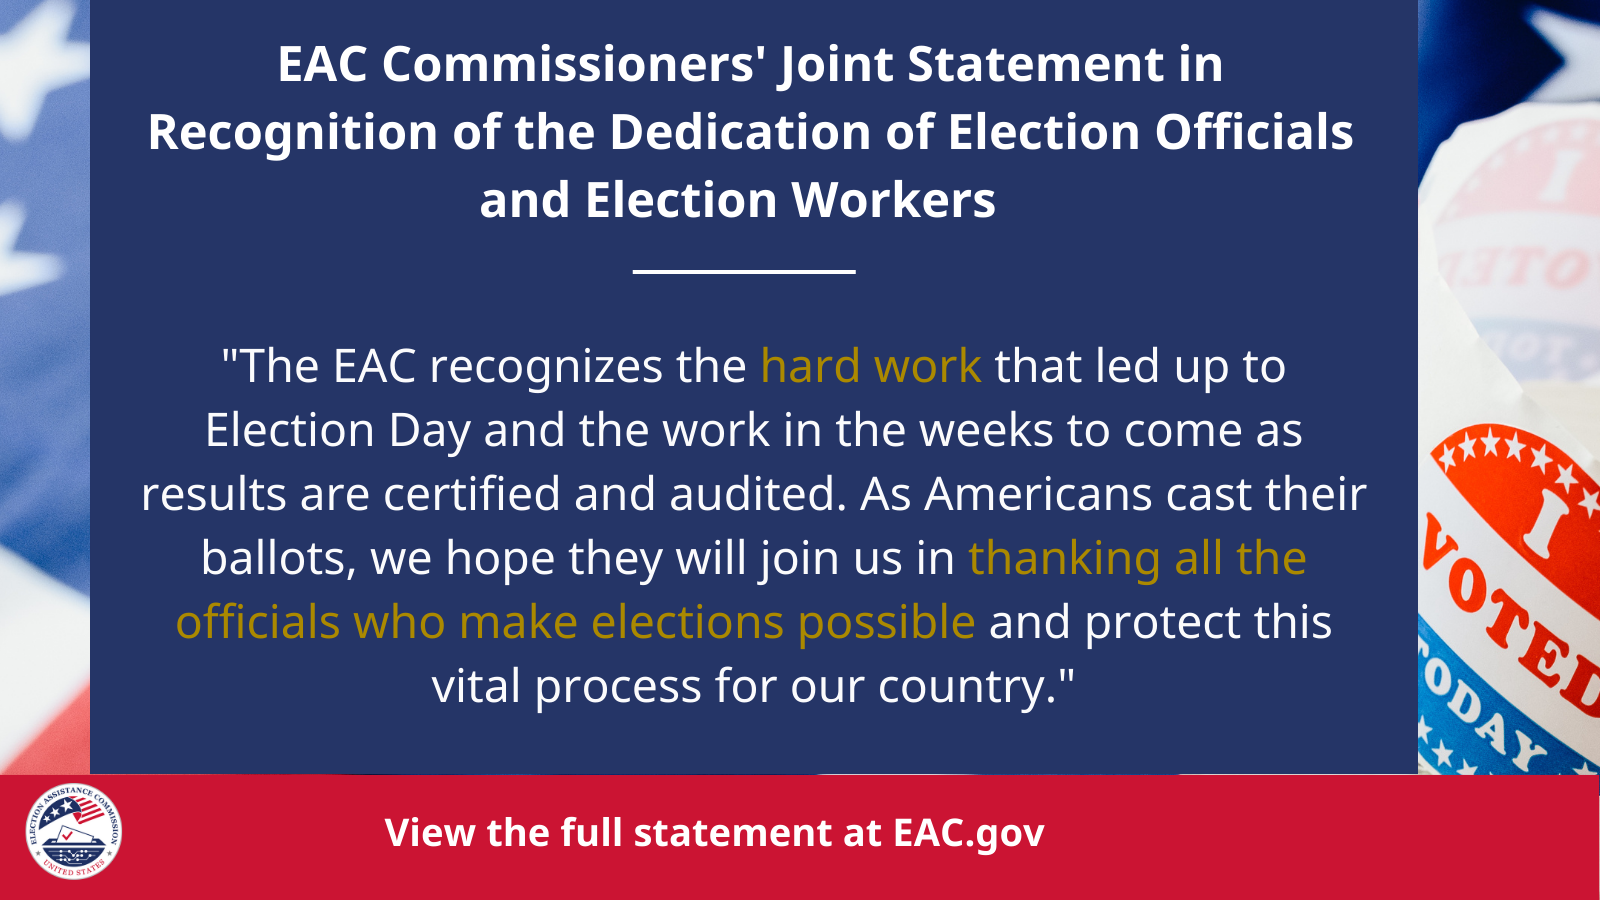 "Heading Text: EAC Commissioners' Joint Statement in Recognition of the Dedication of Election Officials and Election Workers, Quote from Commissioners below header: 'The EAC recognizes the hard work that led up to Election Day and the work in the weeks to come as results are certified and audited. As Americans cast their ballots, we hope they will join us in thanking all the officials who make elections possible and protect this vital process for our country.'"